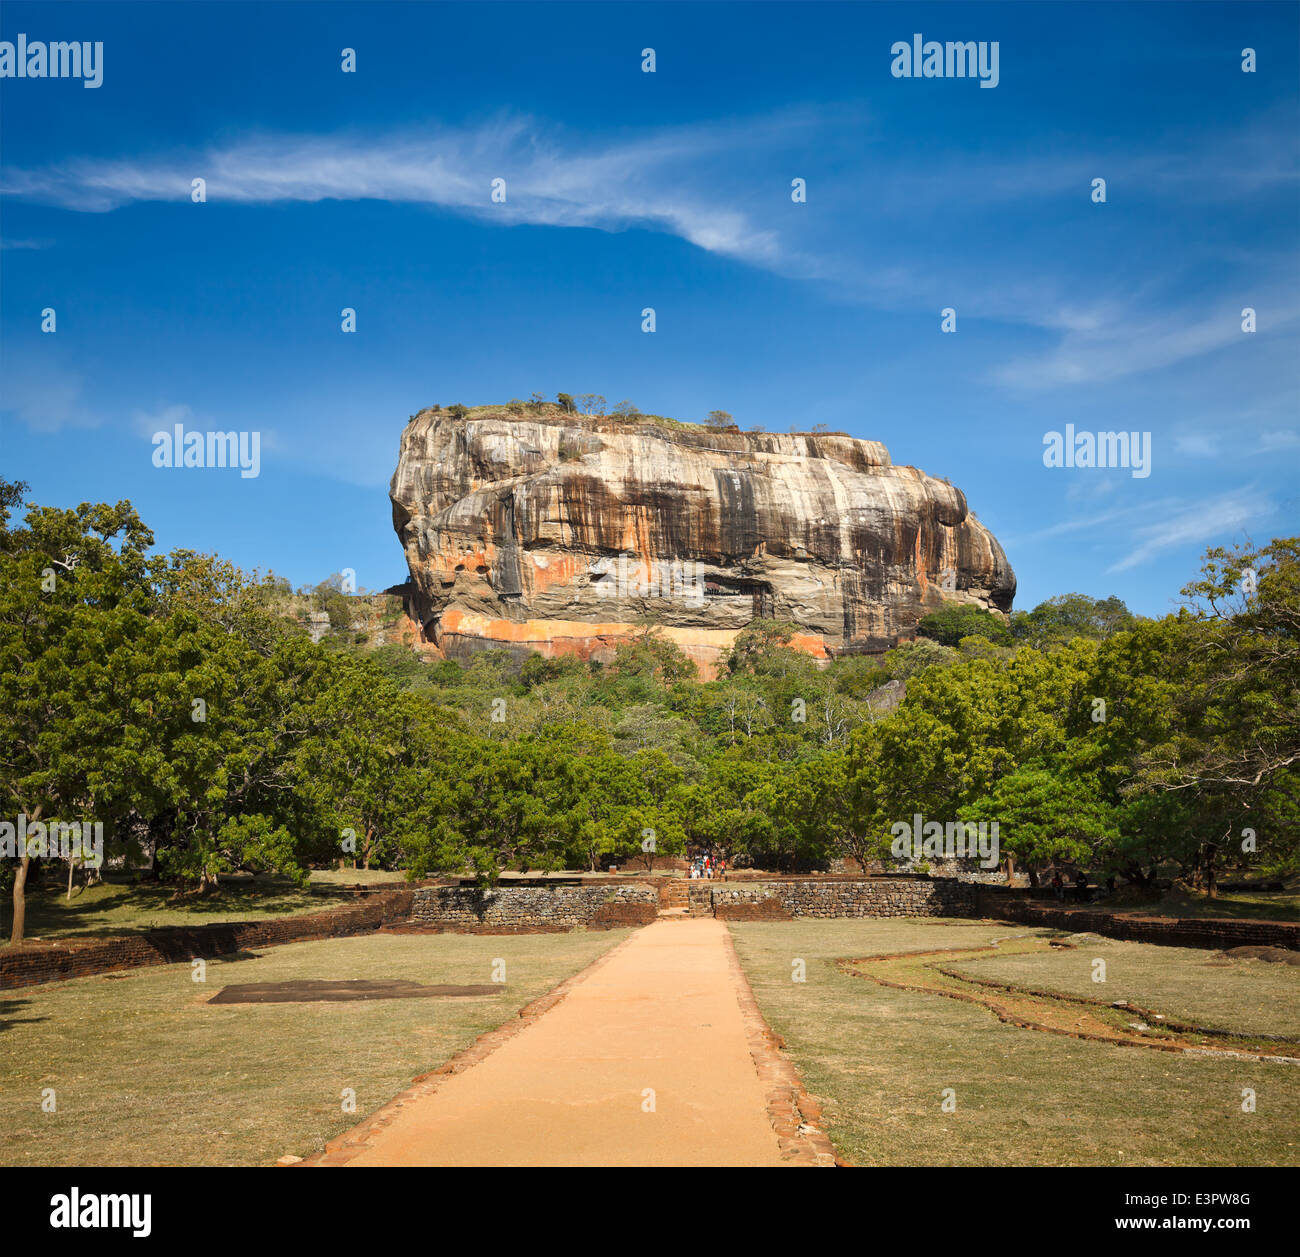 The ancient rock fortress of Yapahuwa is similar to, but smaller than,  Sigiriya. Dating from the 13th century, it was the capital and main  stronghold of King Bhuvanekabahu I (1272 - 1284)